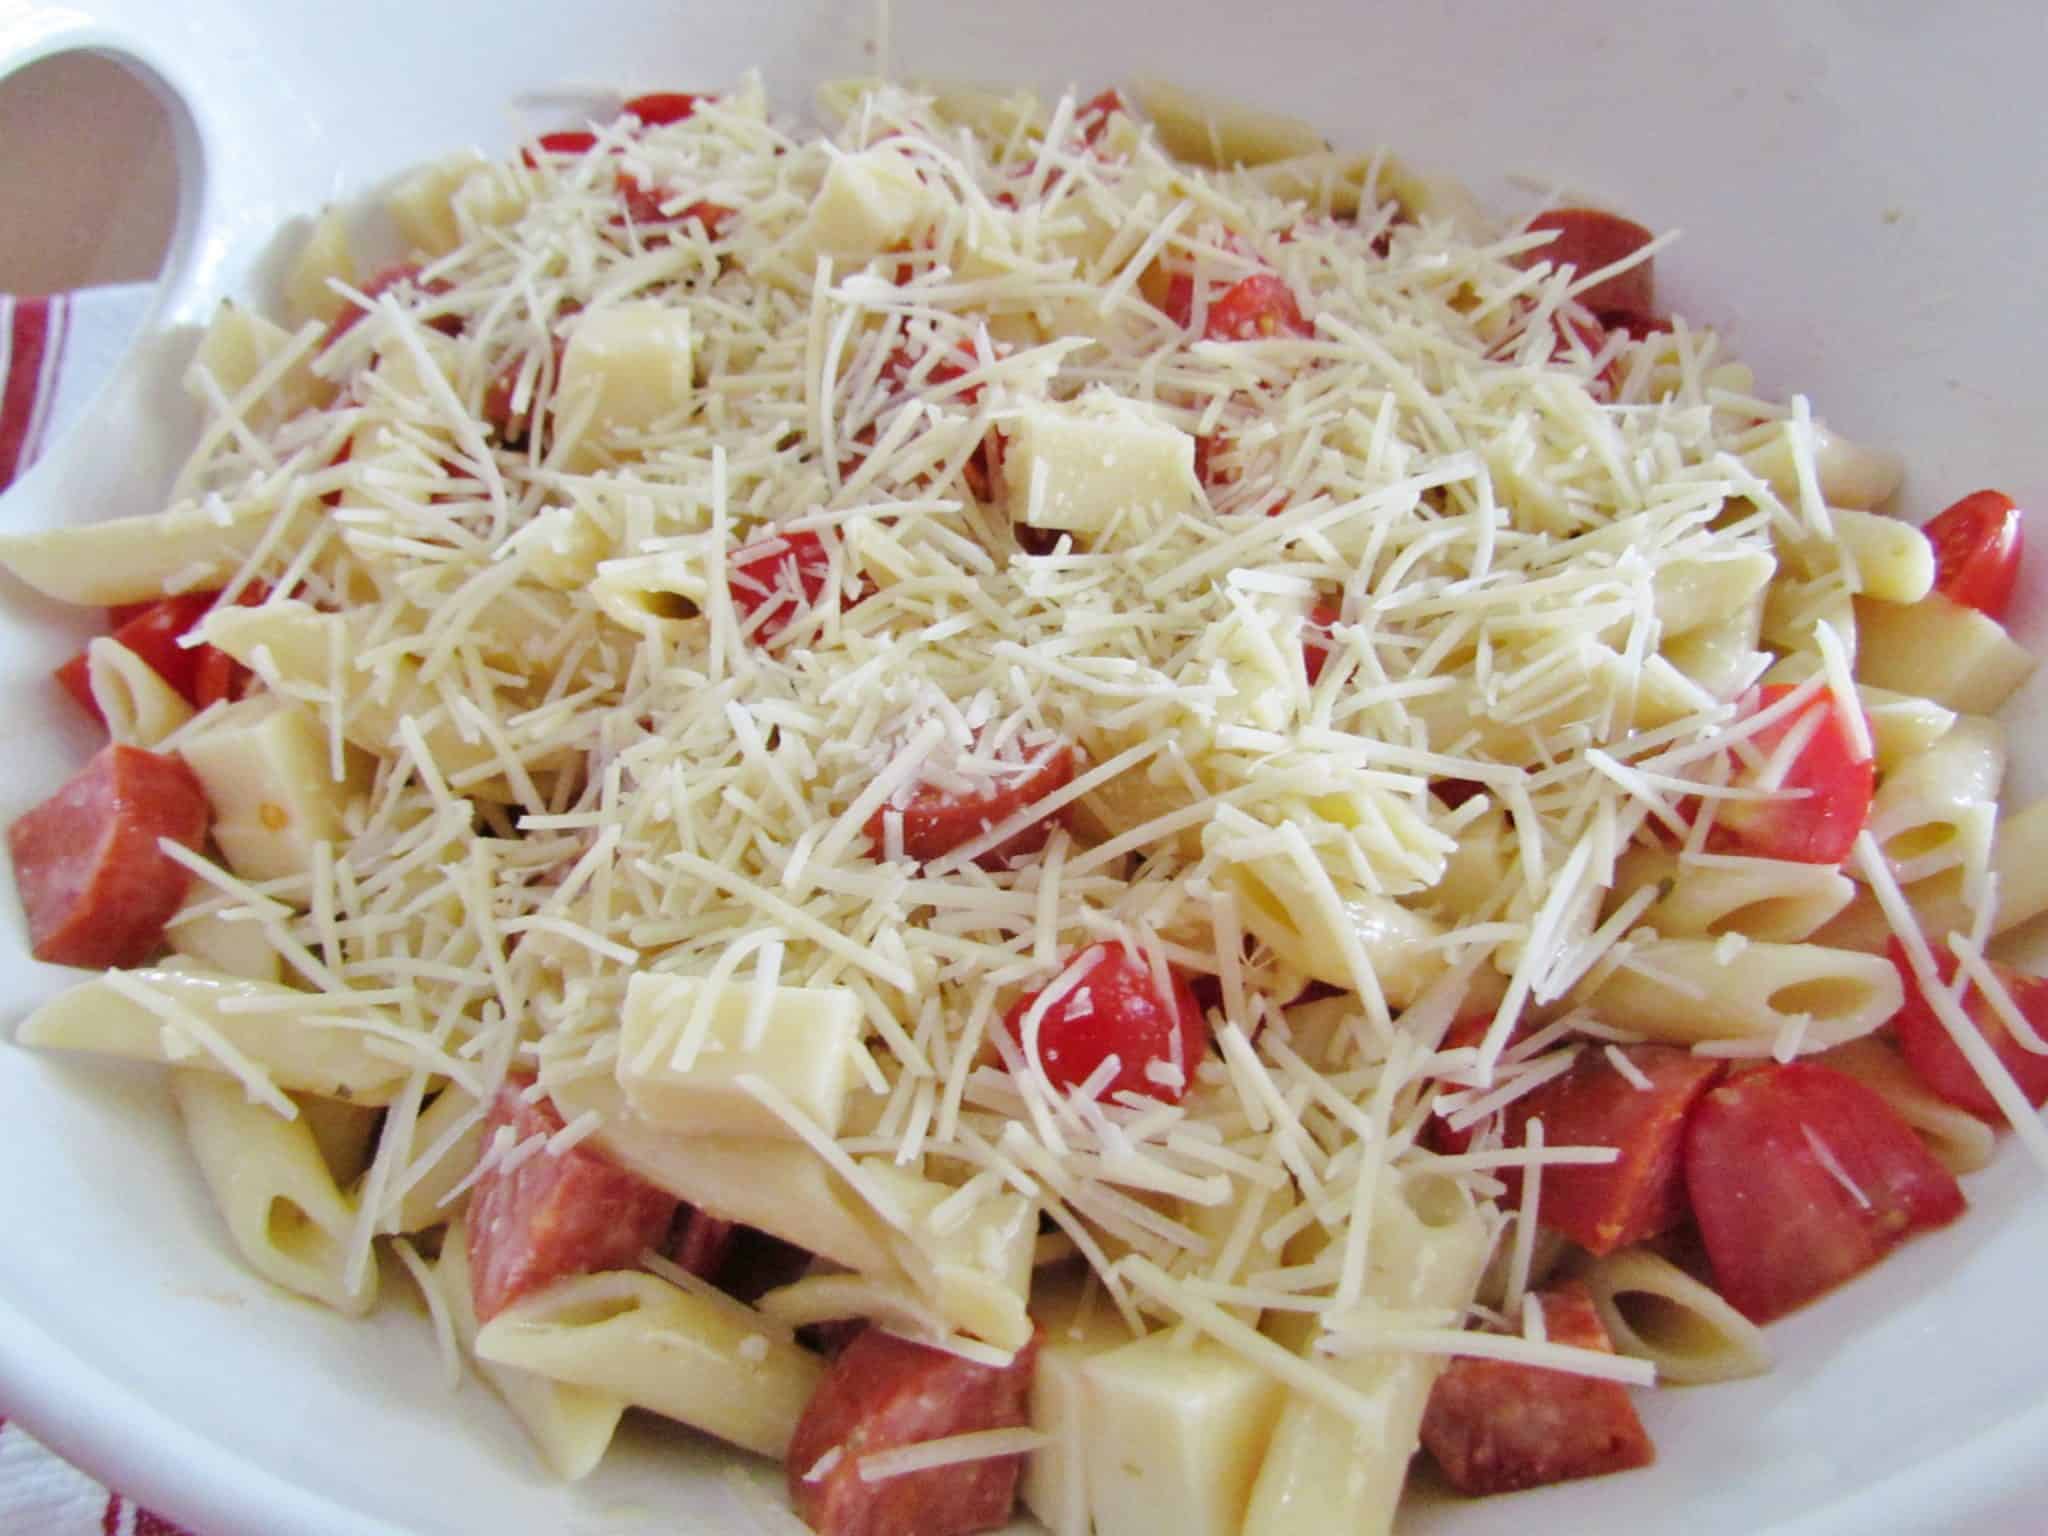 Parmesan cheese added to pepperoni pizza pasta salad in a white bowl.